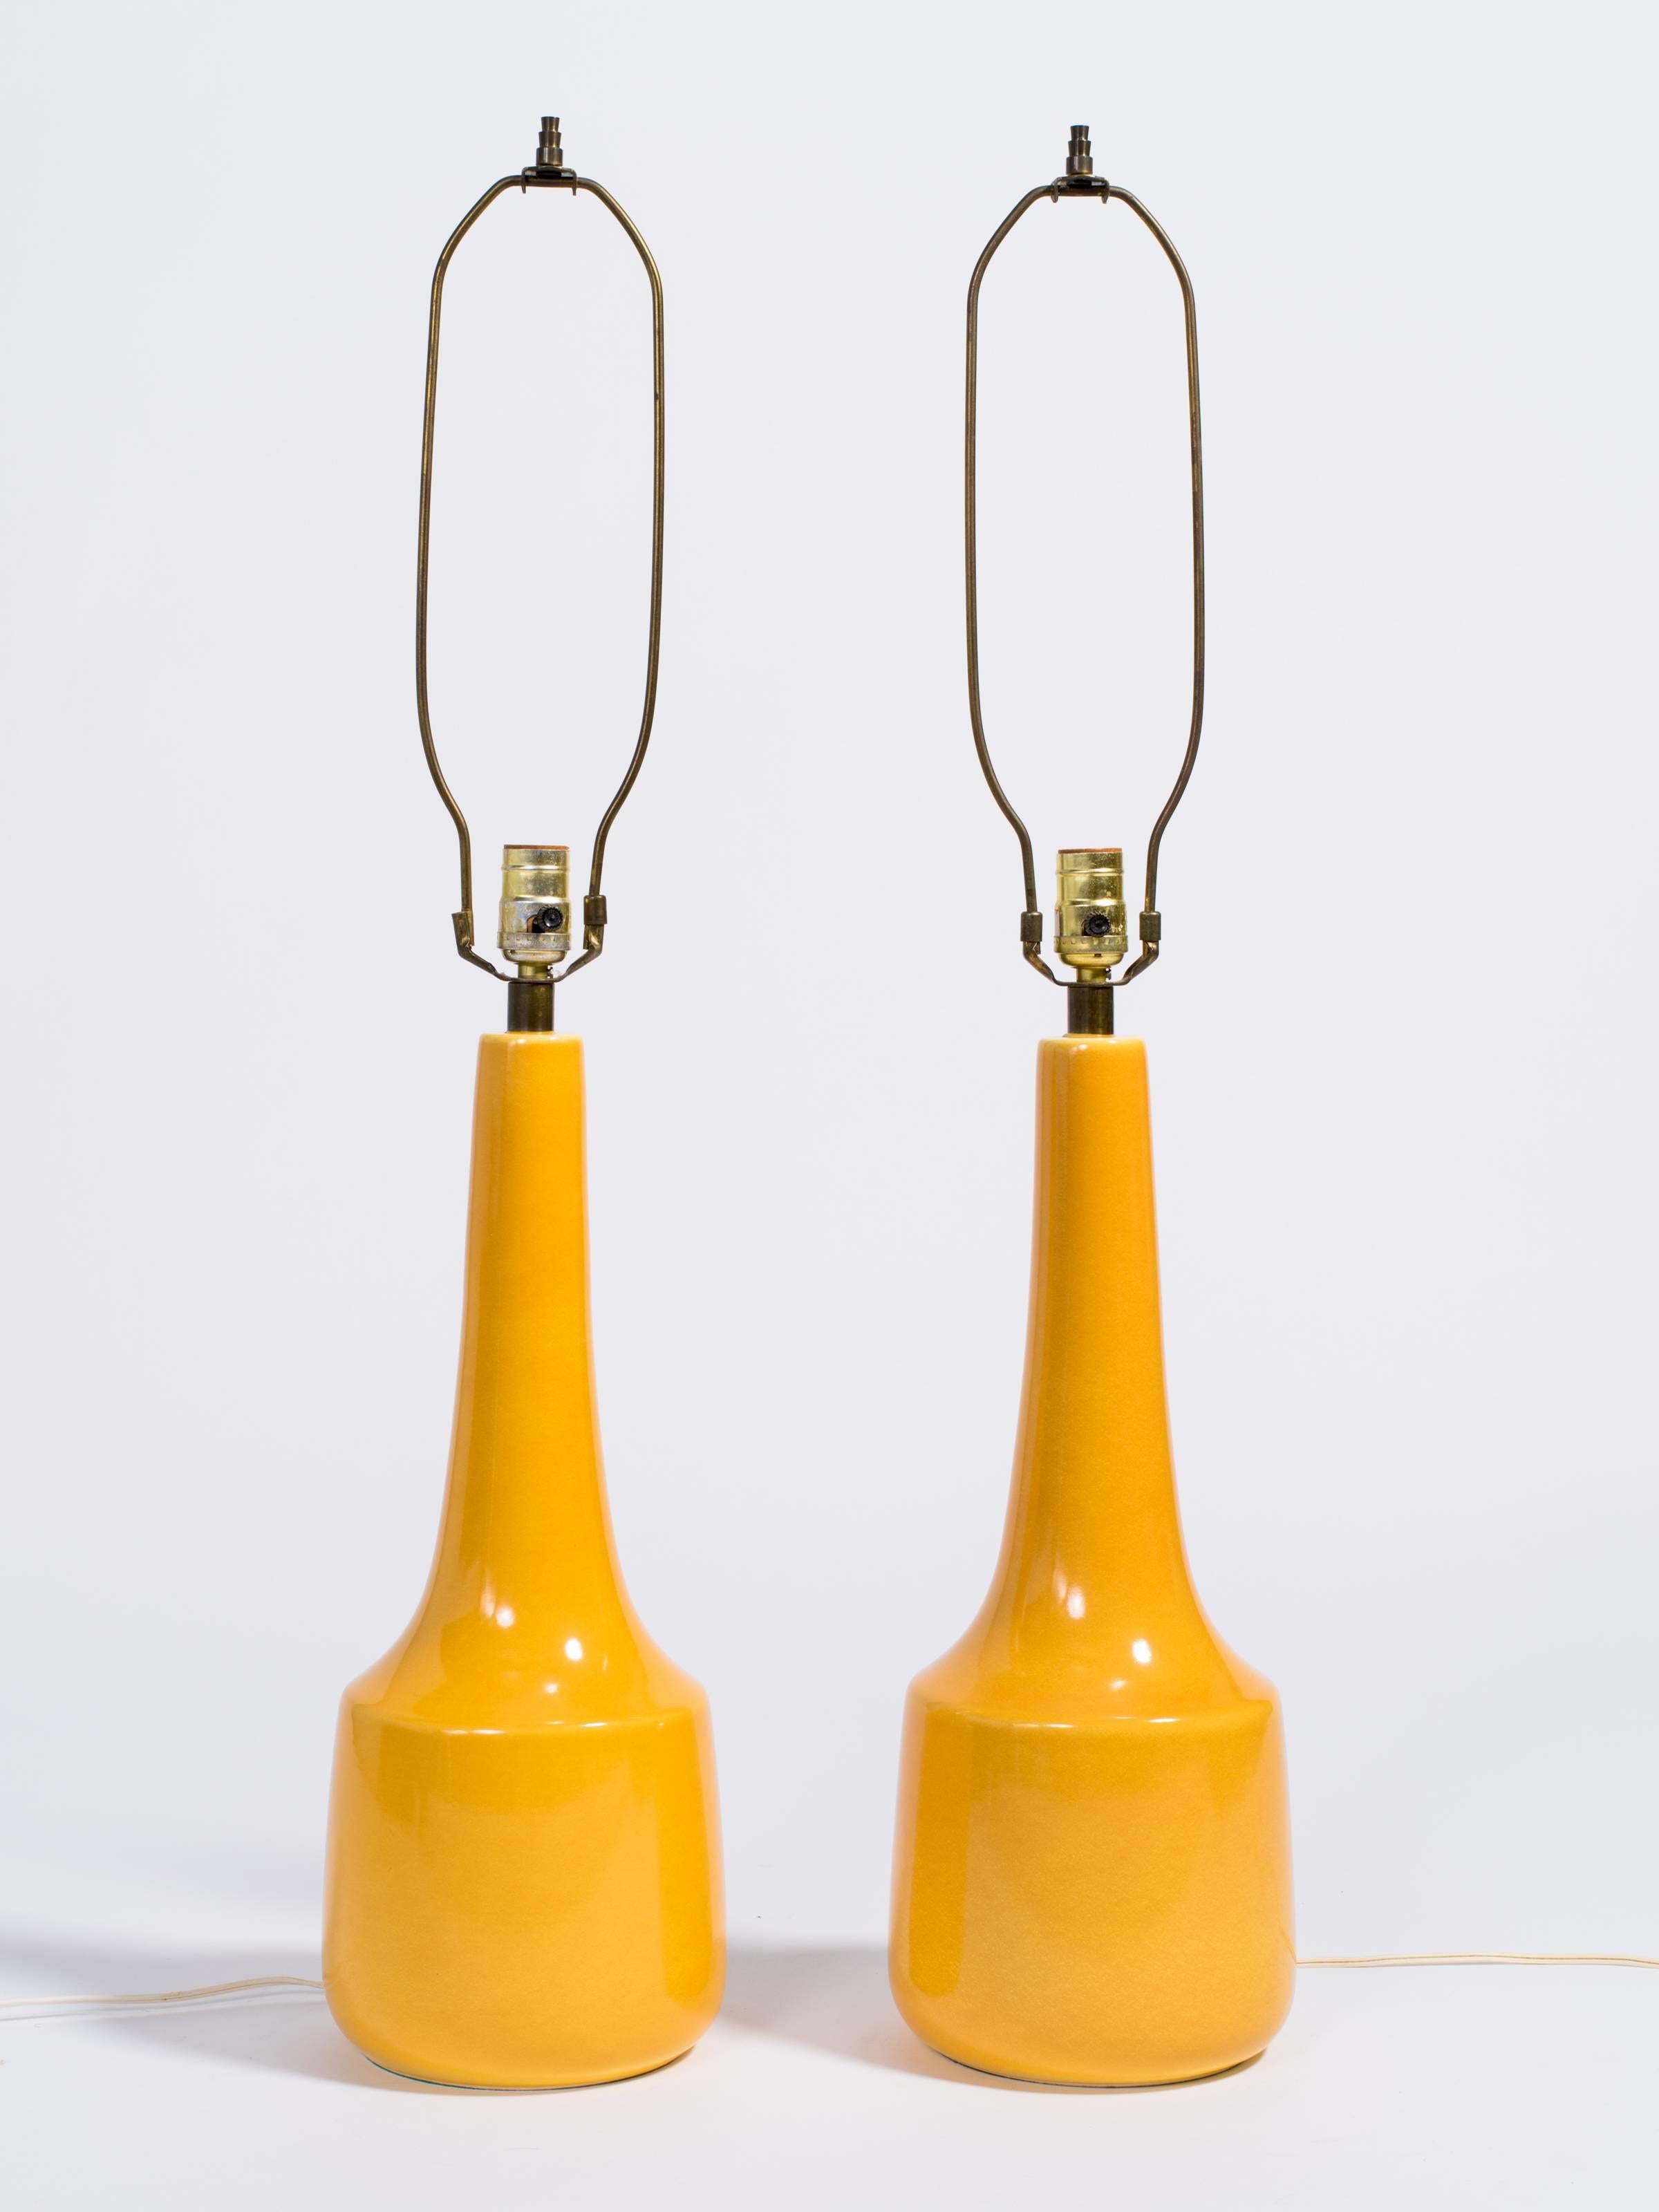 Pair of yellow ceramic lamps designed by Lotte and Gunnar Bostlund. They have the original shades.